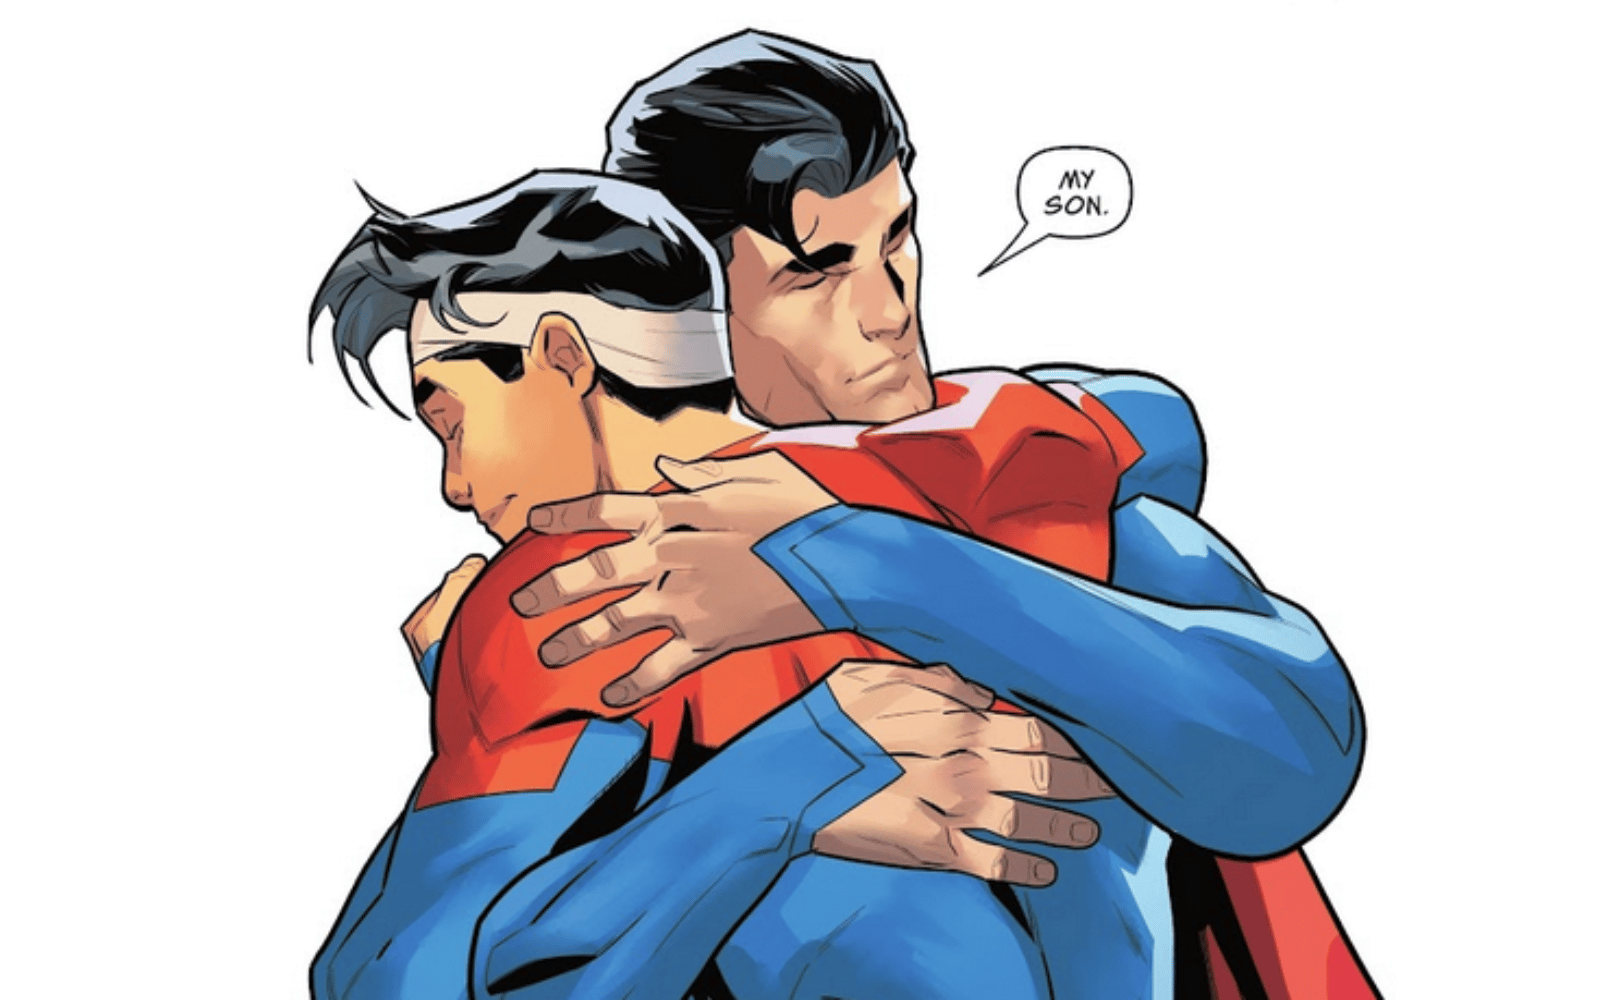 Superman loves and accepts his bisexual son in new DC comic image pic